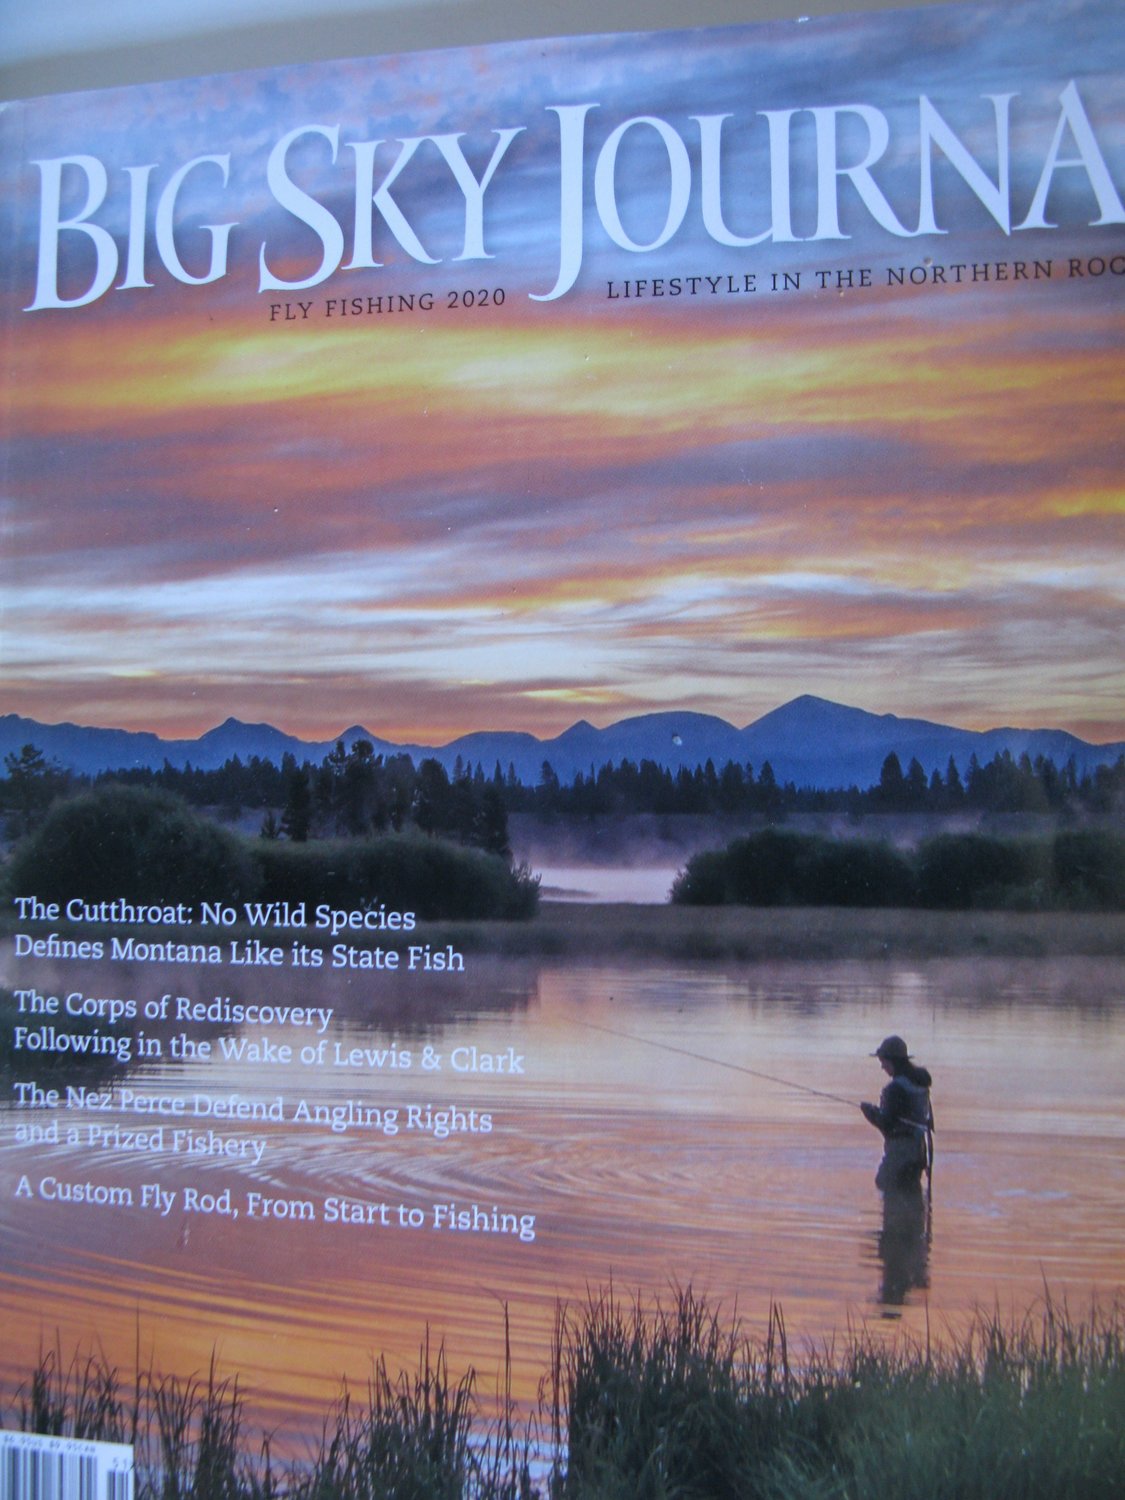 The Big Sky Journal, a magazine about Montana and the Rocky Mountain west, that promotes real estate development in the region.